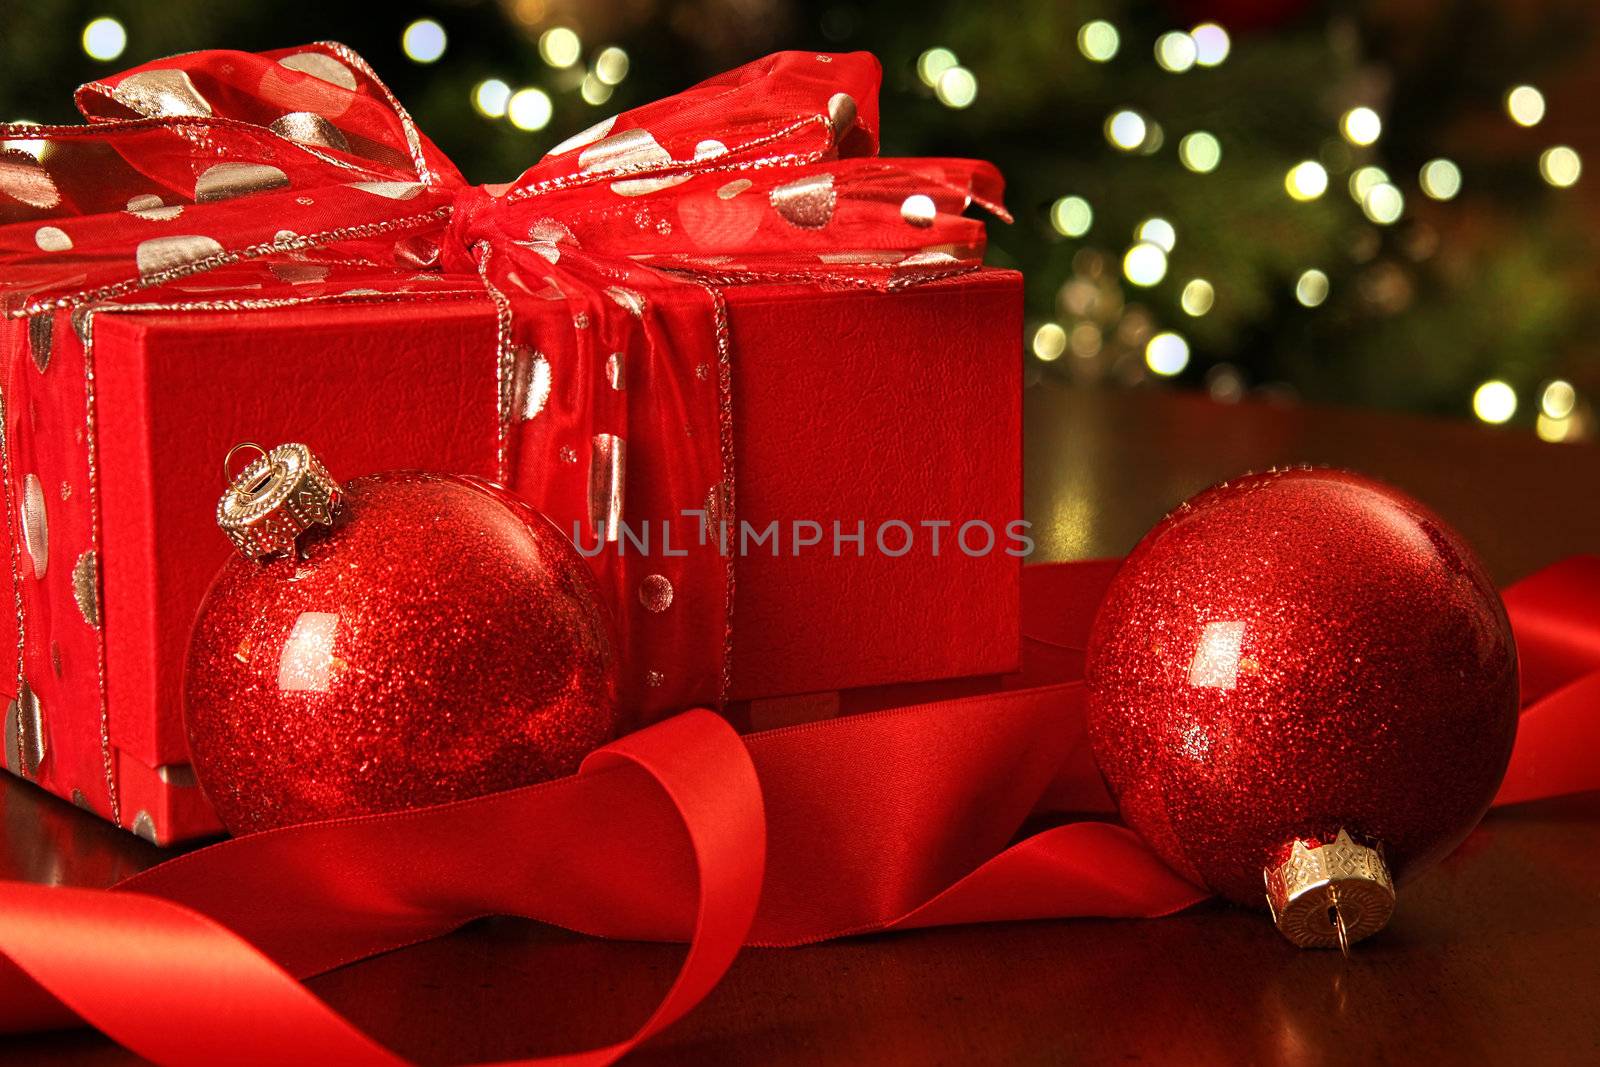 Red Christmas gift with ornaments in front of tree